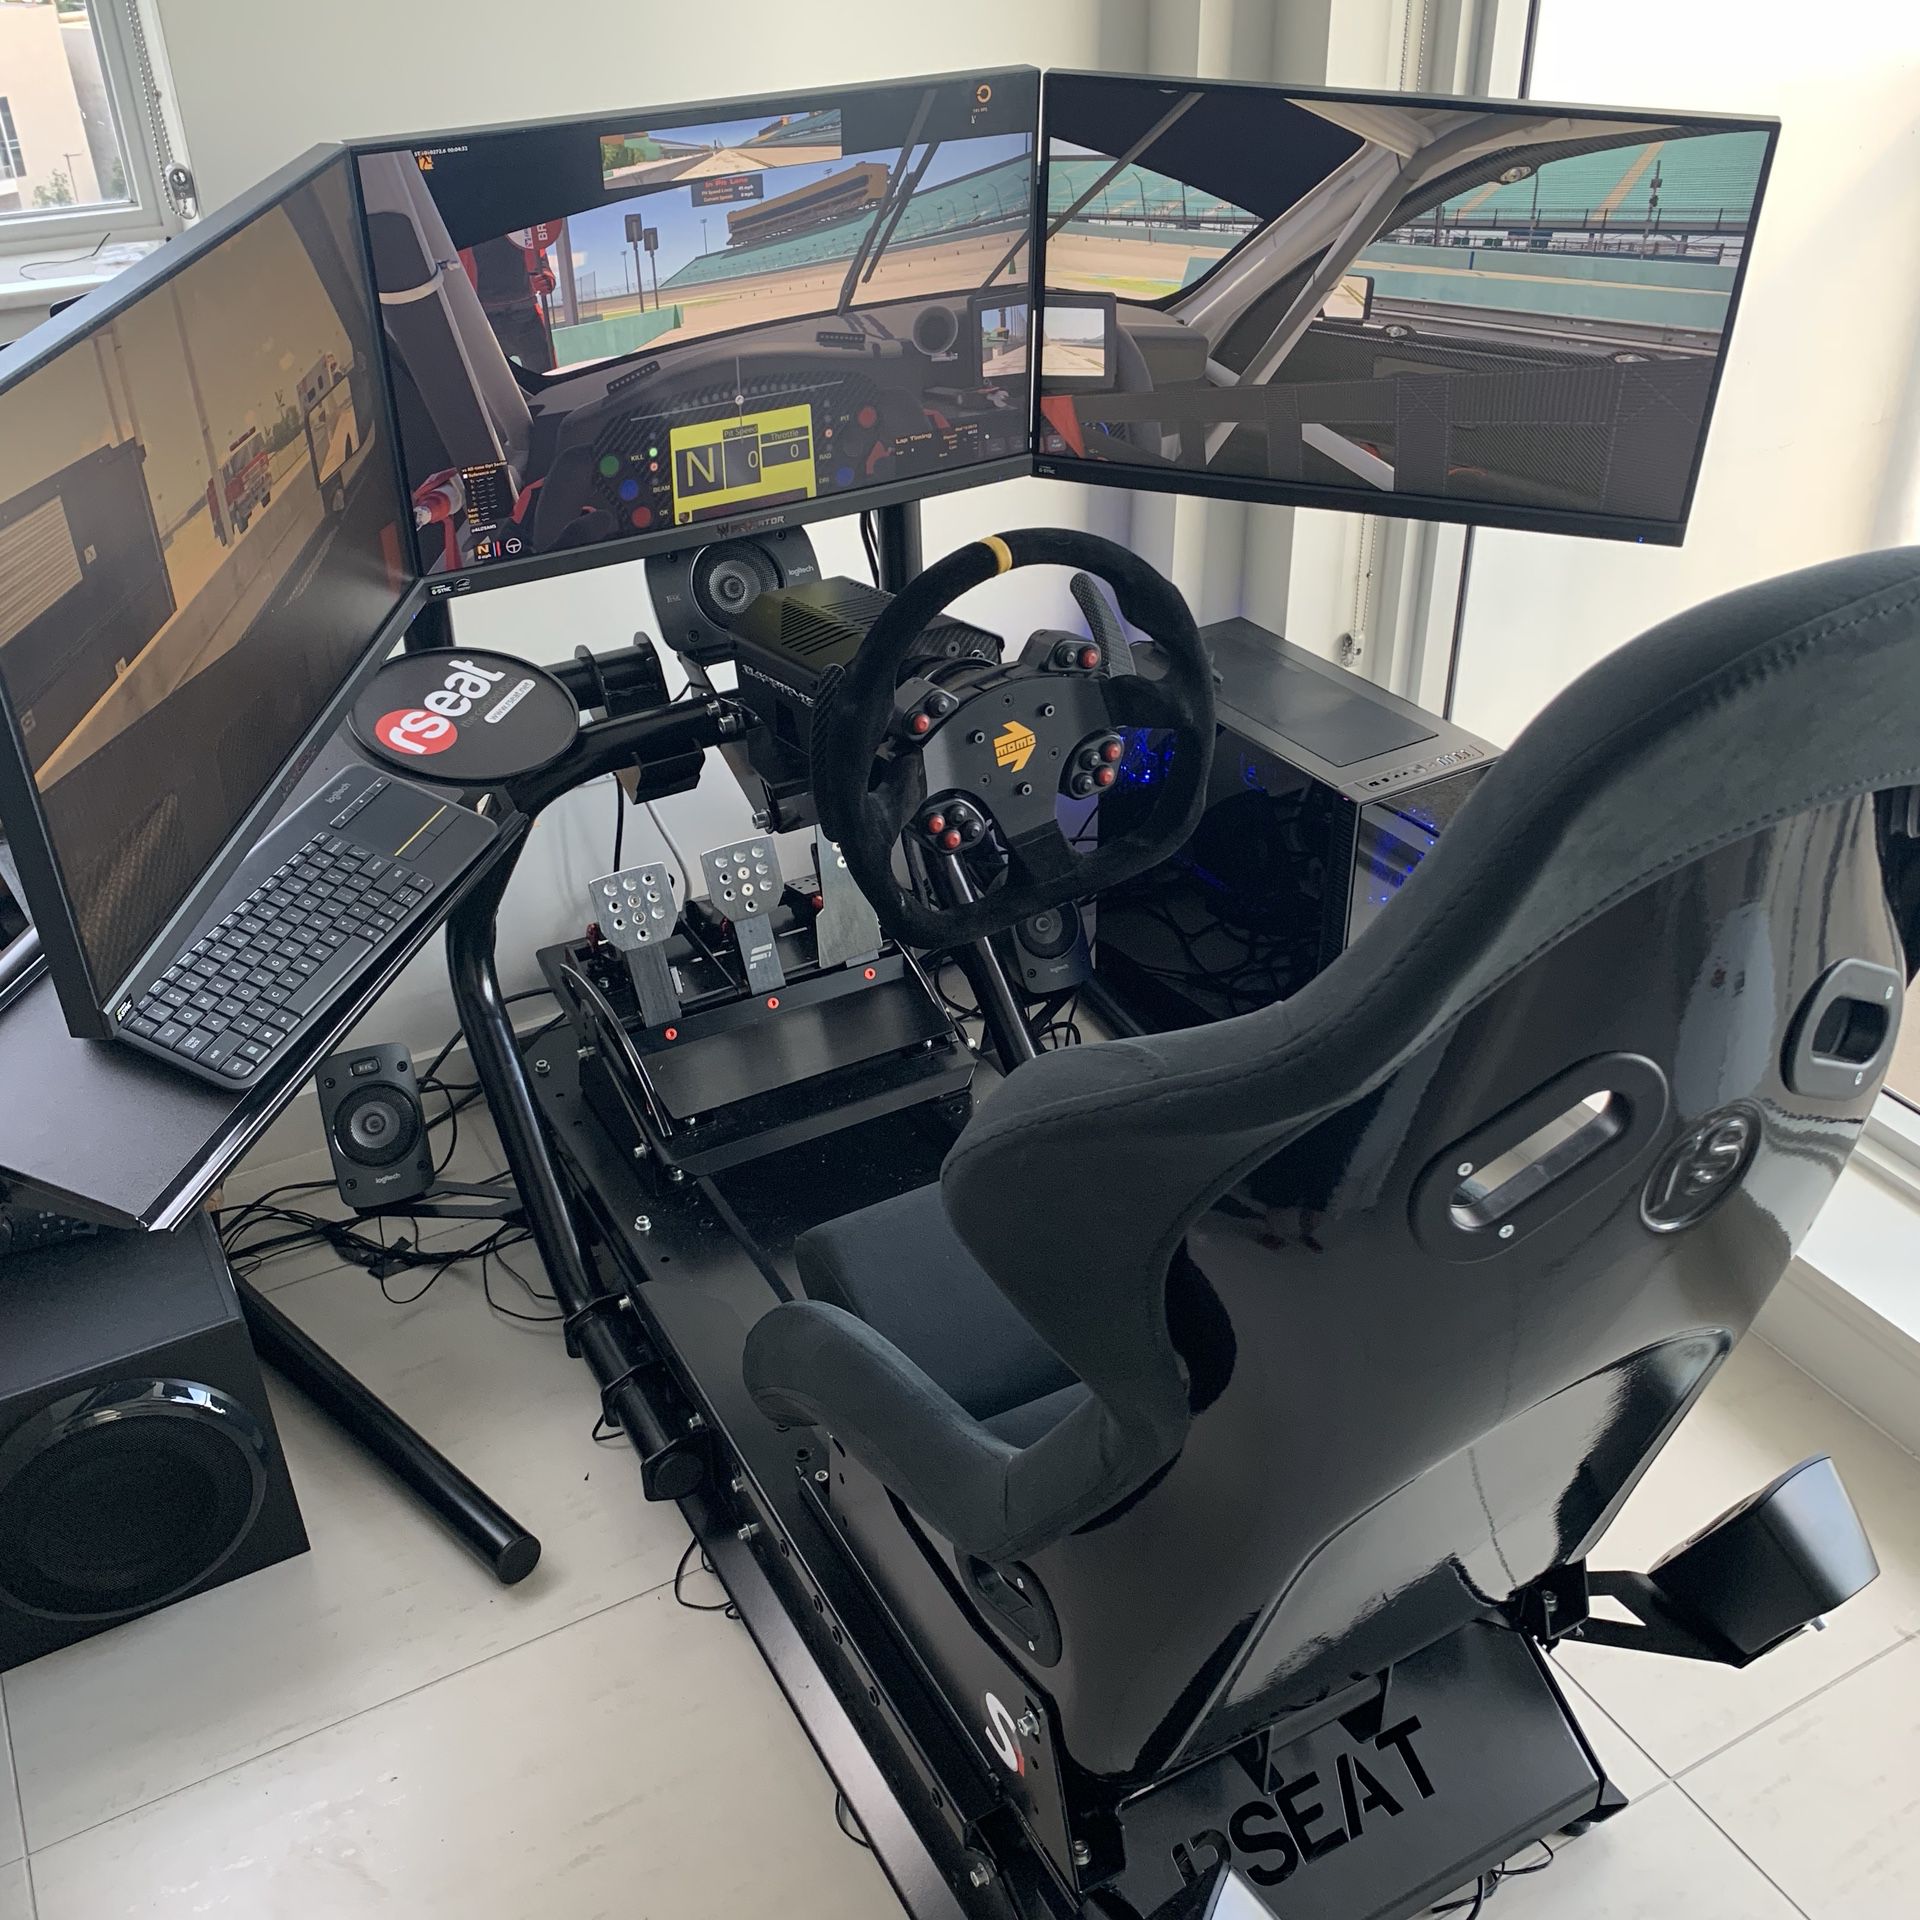 Rseat pro simulator with accuforce direct drive Fanatec pedal